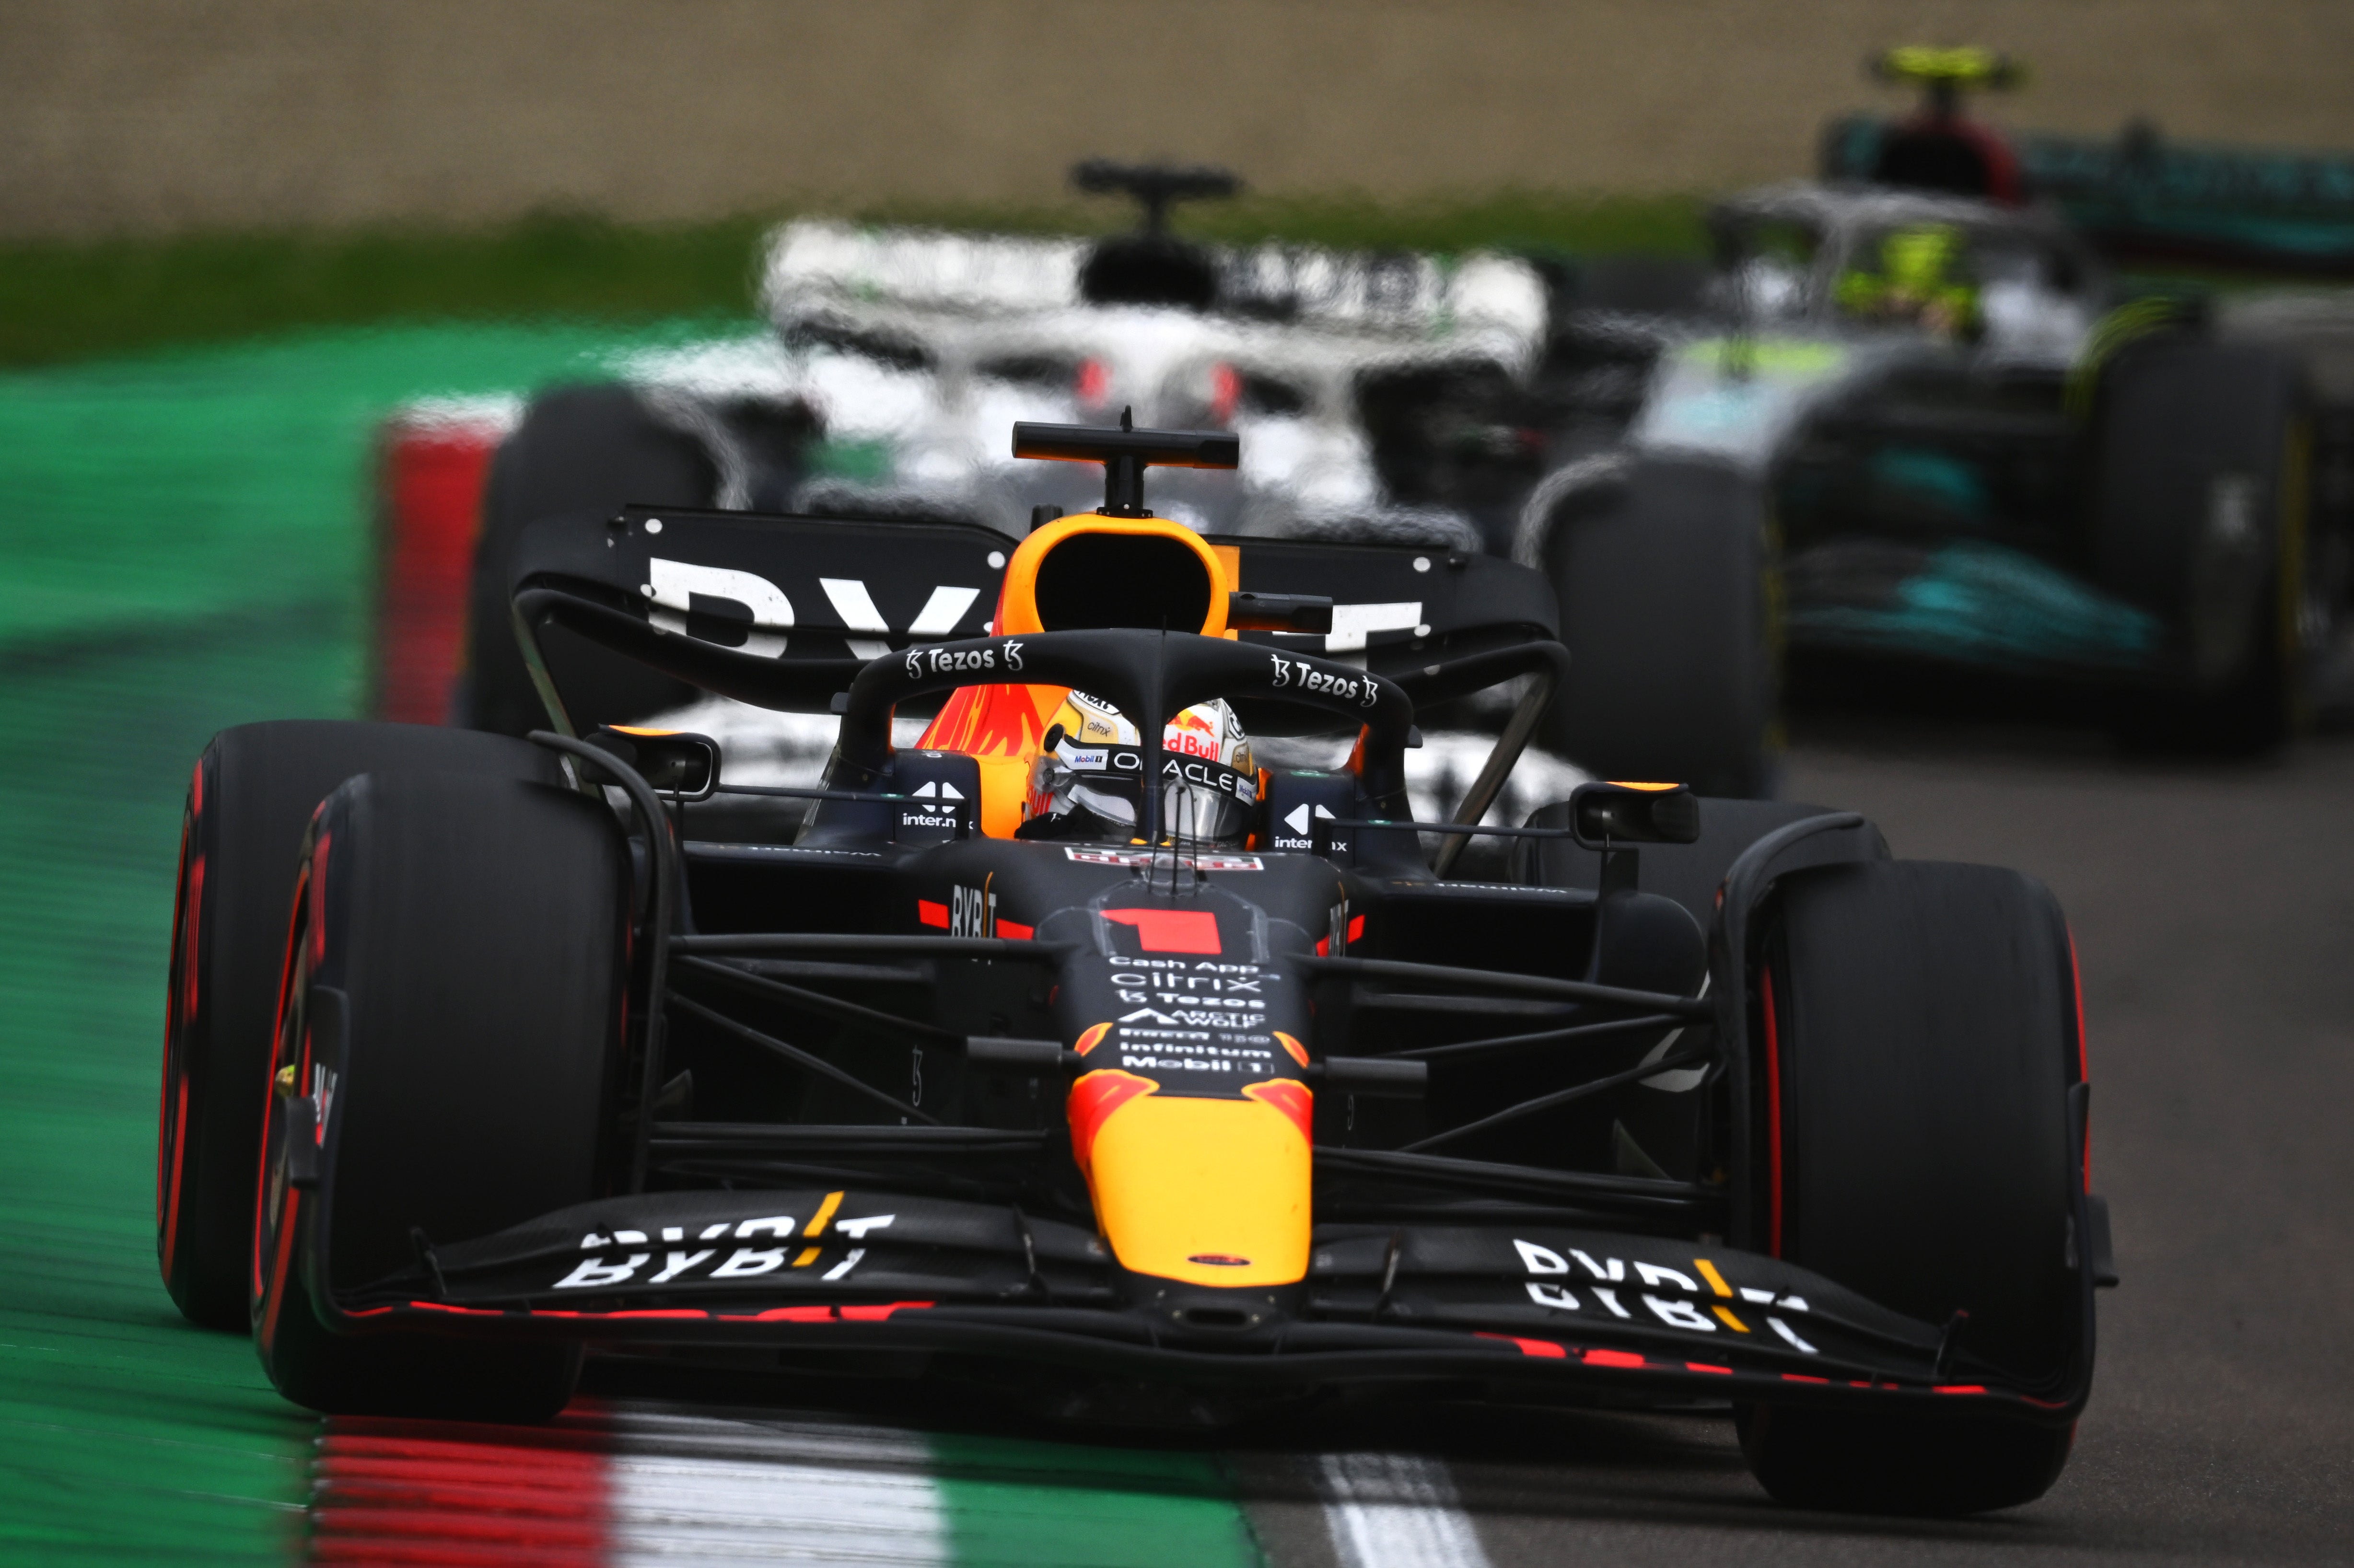 Max Verstappen secured his second race victory of the season at the Emilia Romagna Grand Prix